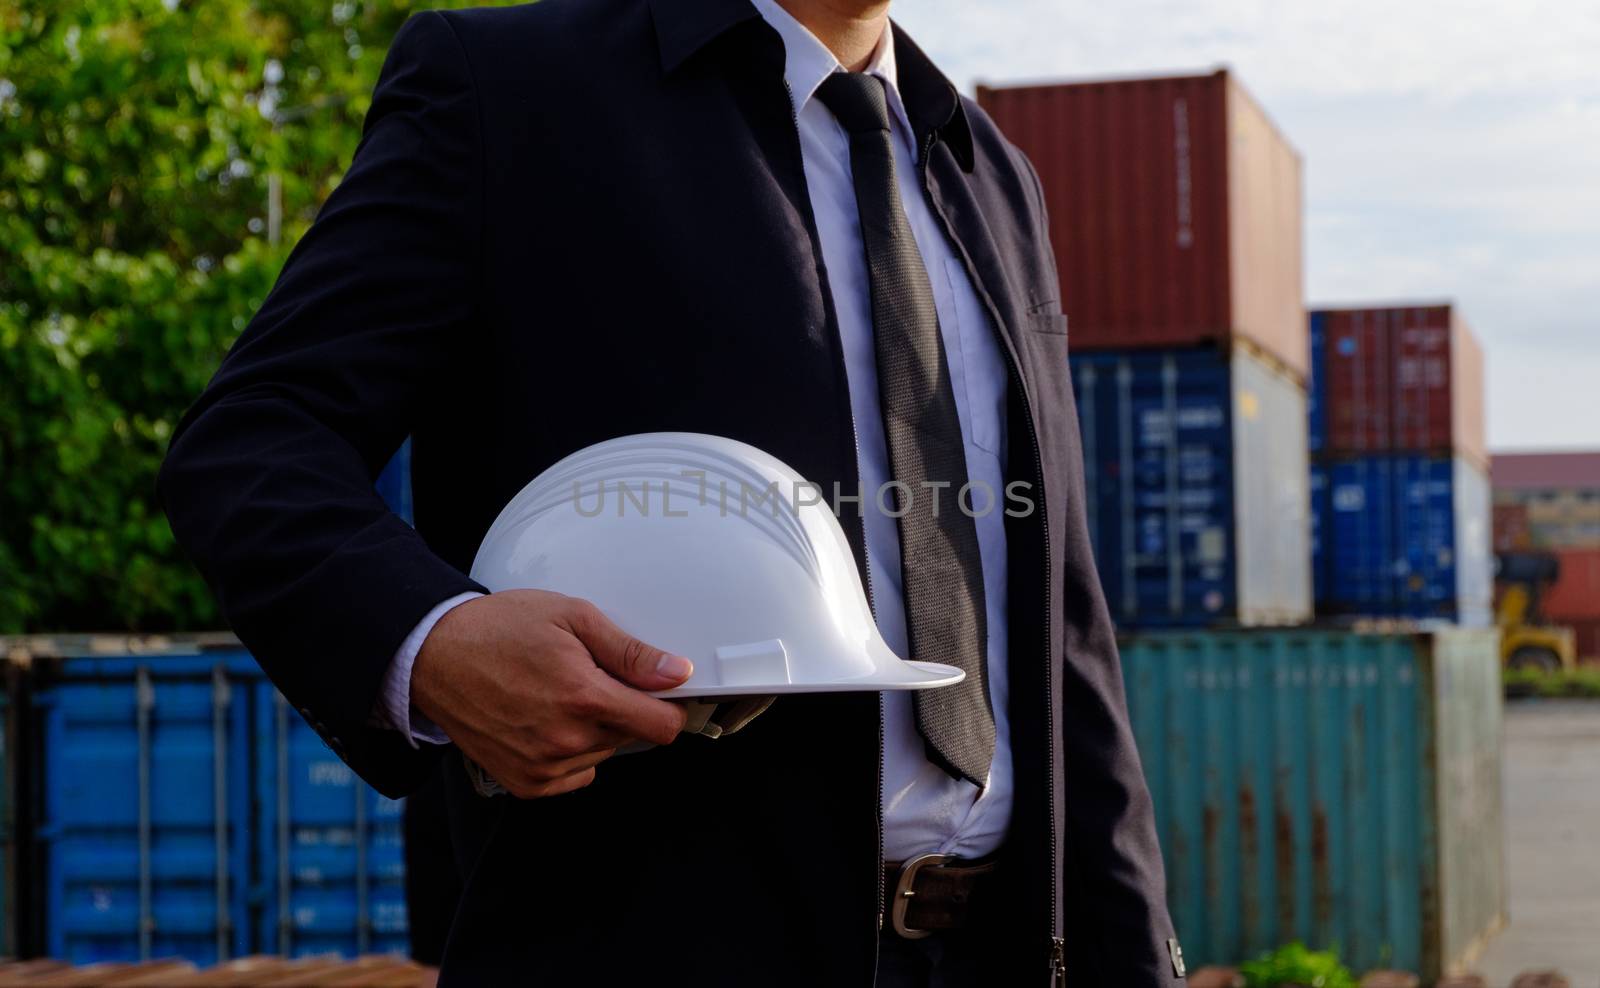 The engineer is holding a helmet on containers background. The construction manager on containers background.